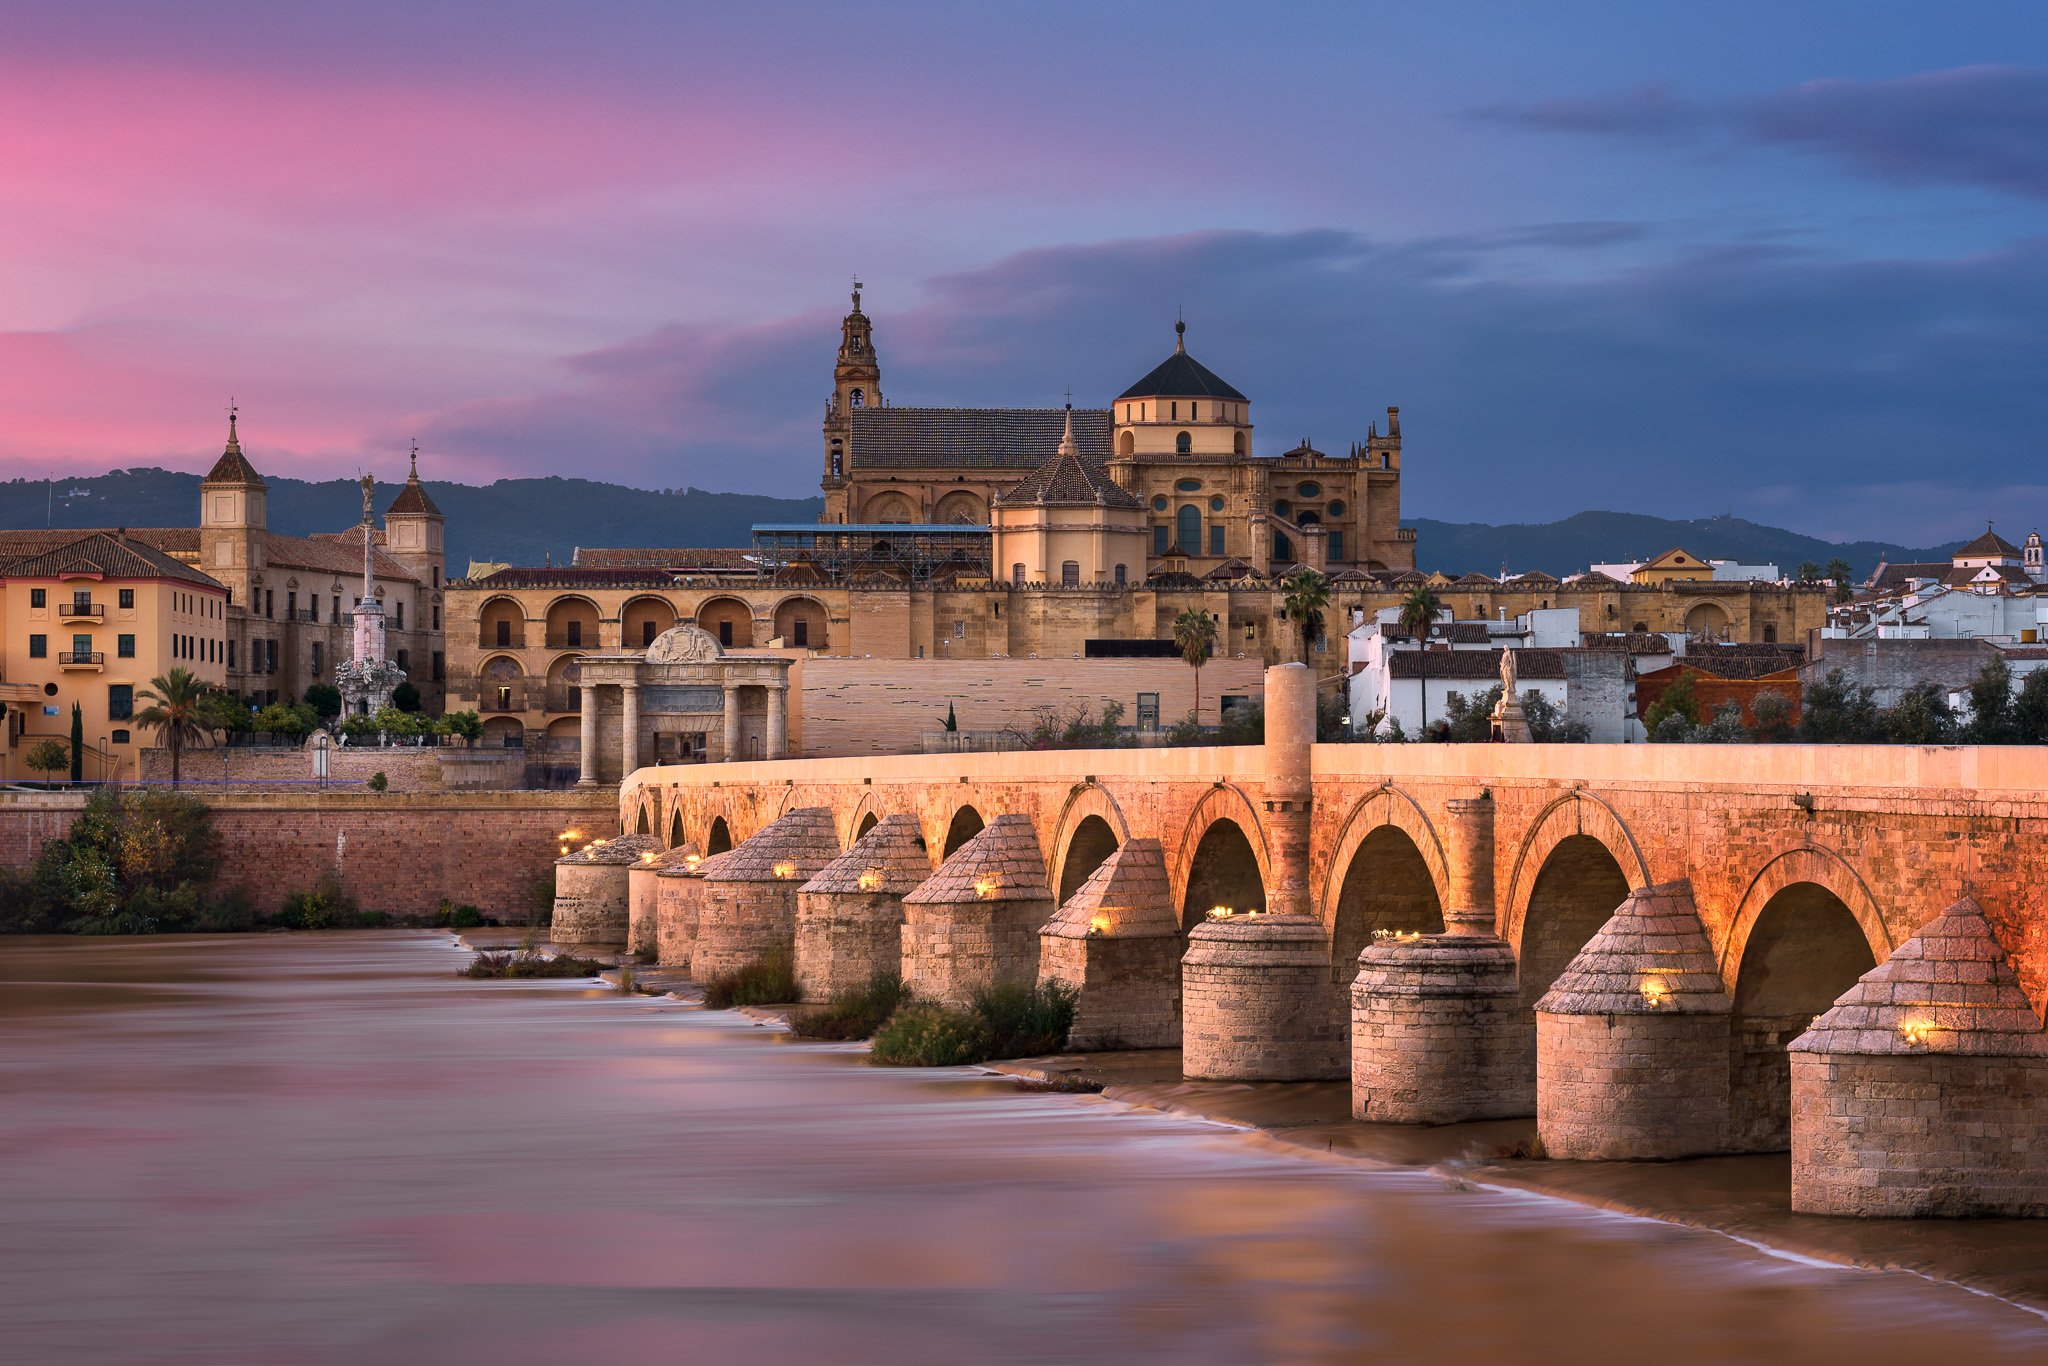 ancient, andalucia, andalusia, andalusian, arch, architectural, architecture, blue, bridge, building, castle, cathedral, catholic, church, city, cityscape, cordoba, culture, dusk, europe, evening, fort, guadalquivir, heritage, historic, history, iberia, i, Andrey Omelyanchuk